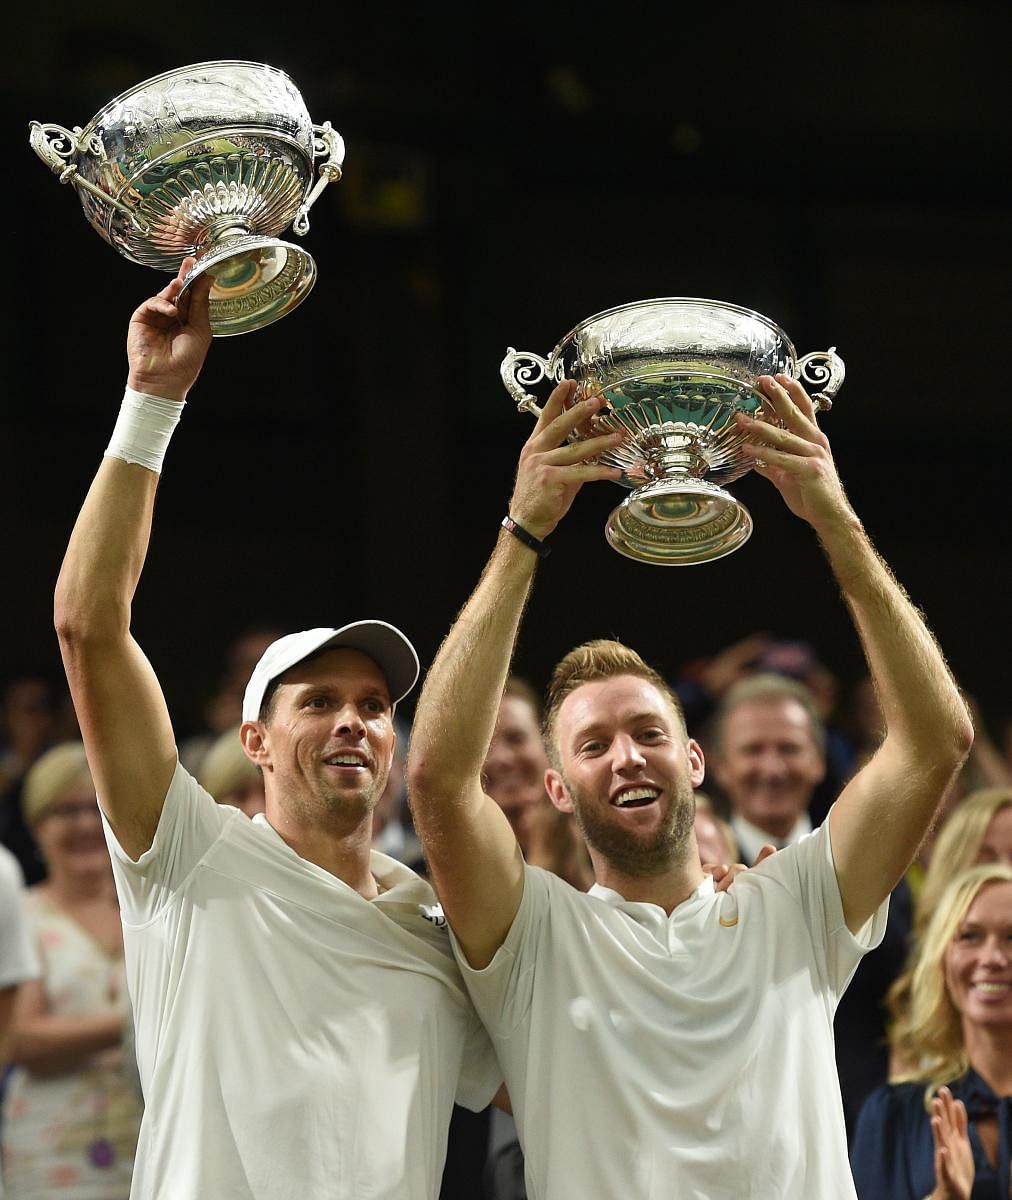 NEW ALLIANCE Americans Mike Bryan (left) and Jack Sock celebrate with the Wimbledon men's doubles trophies on Saturday. AFP